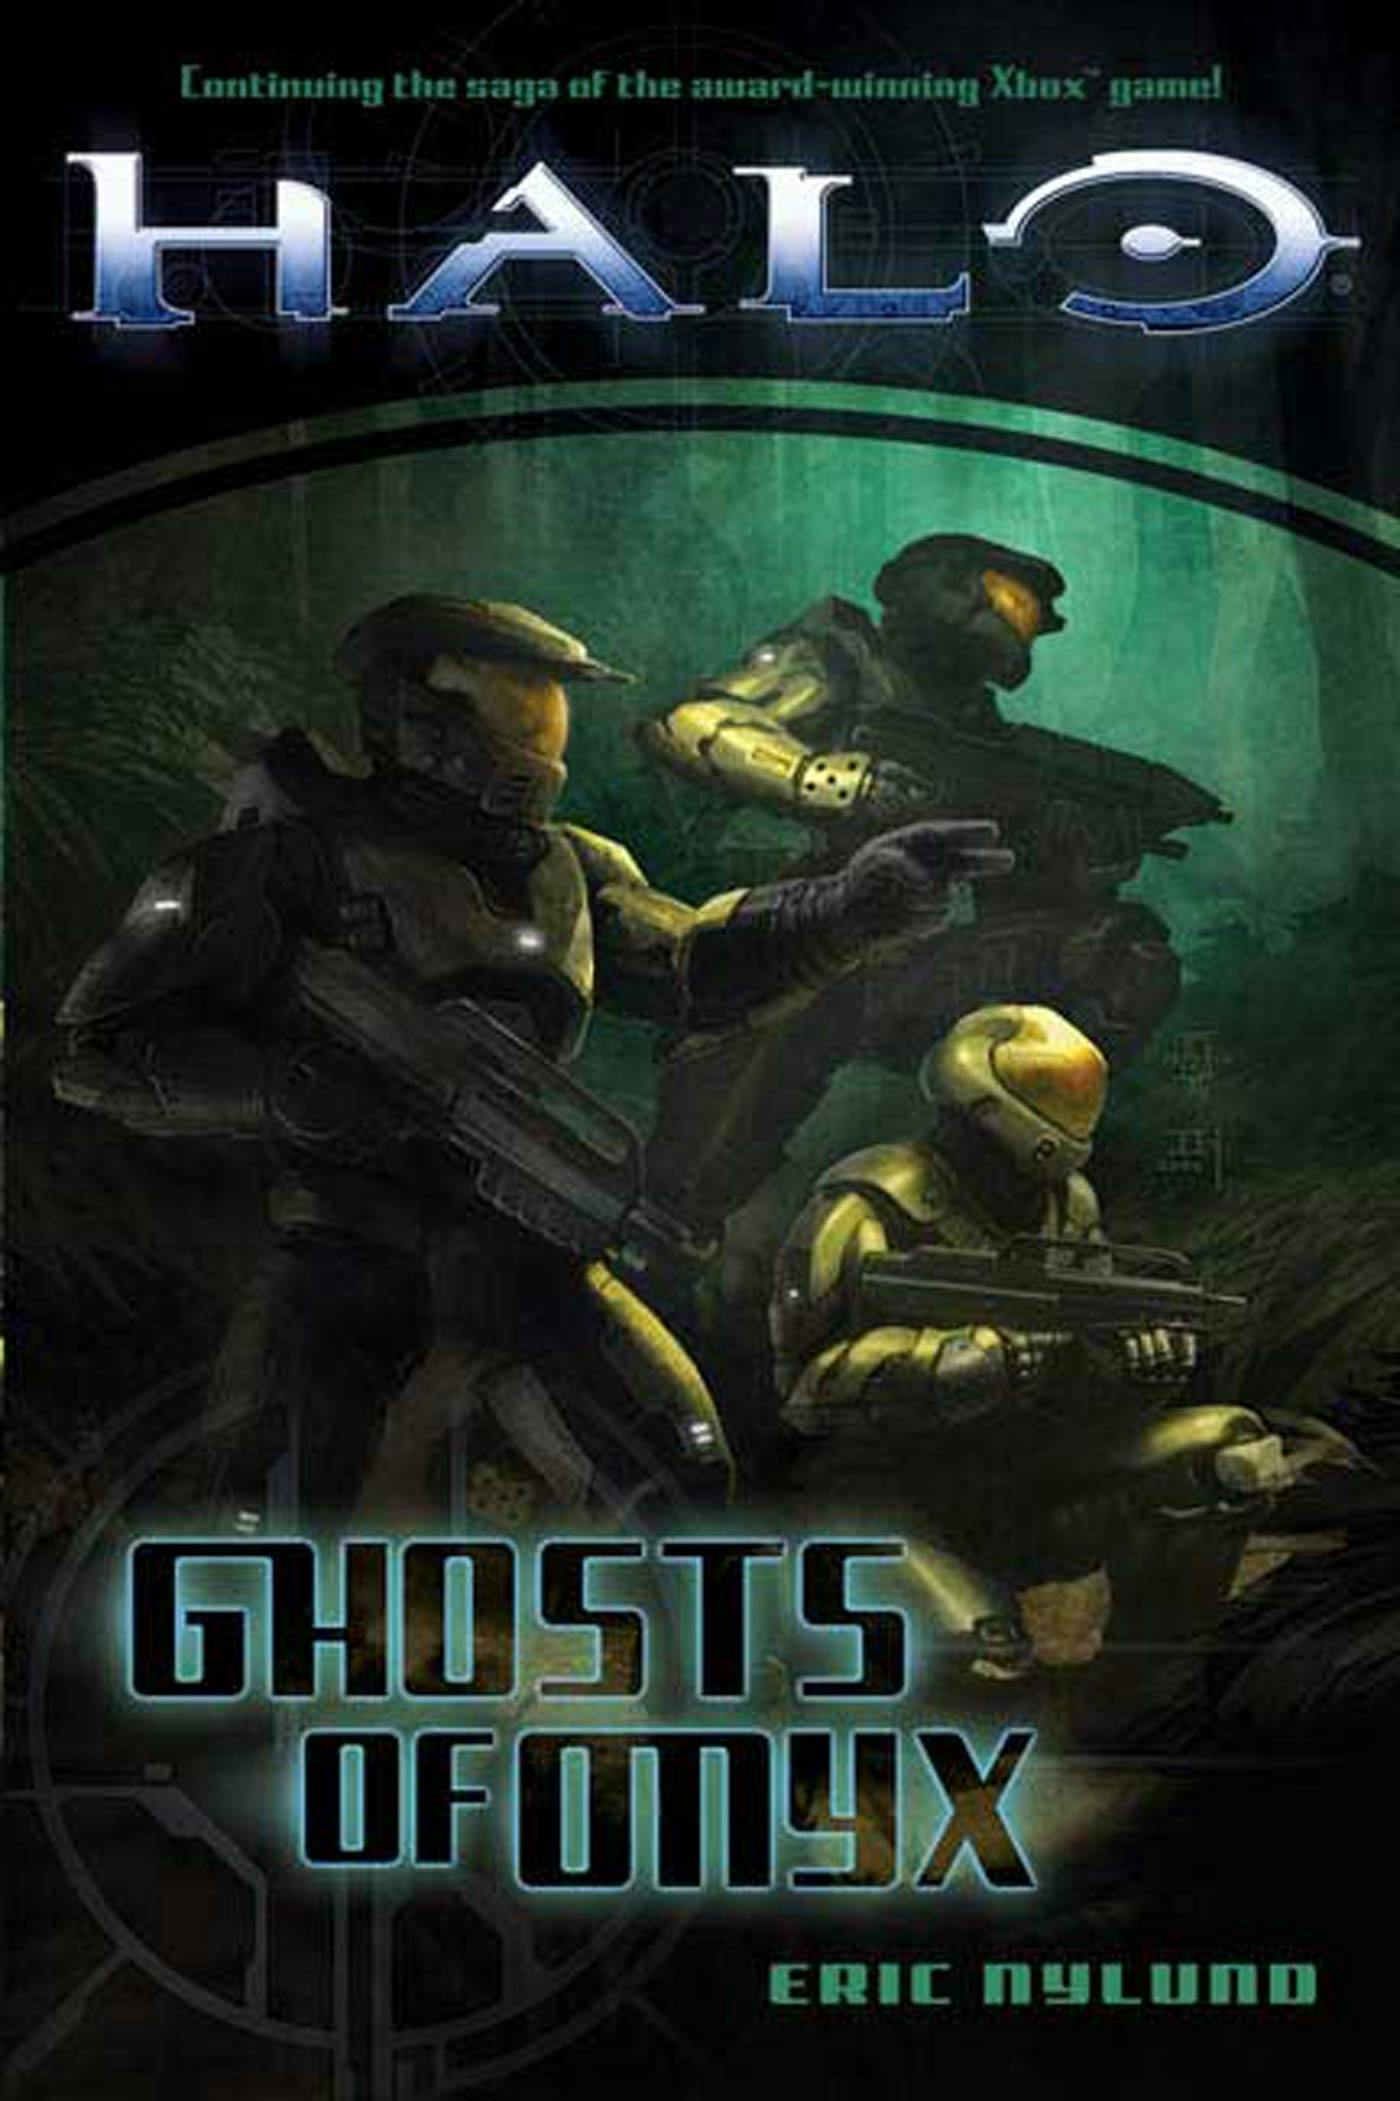 Cover for the book titled as: Halo: Ghosts of Onyx